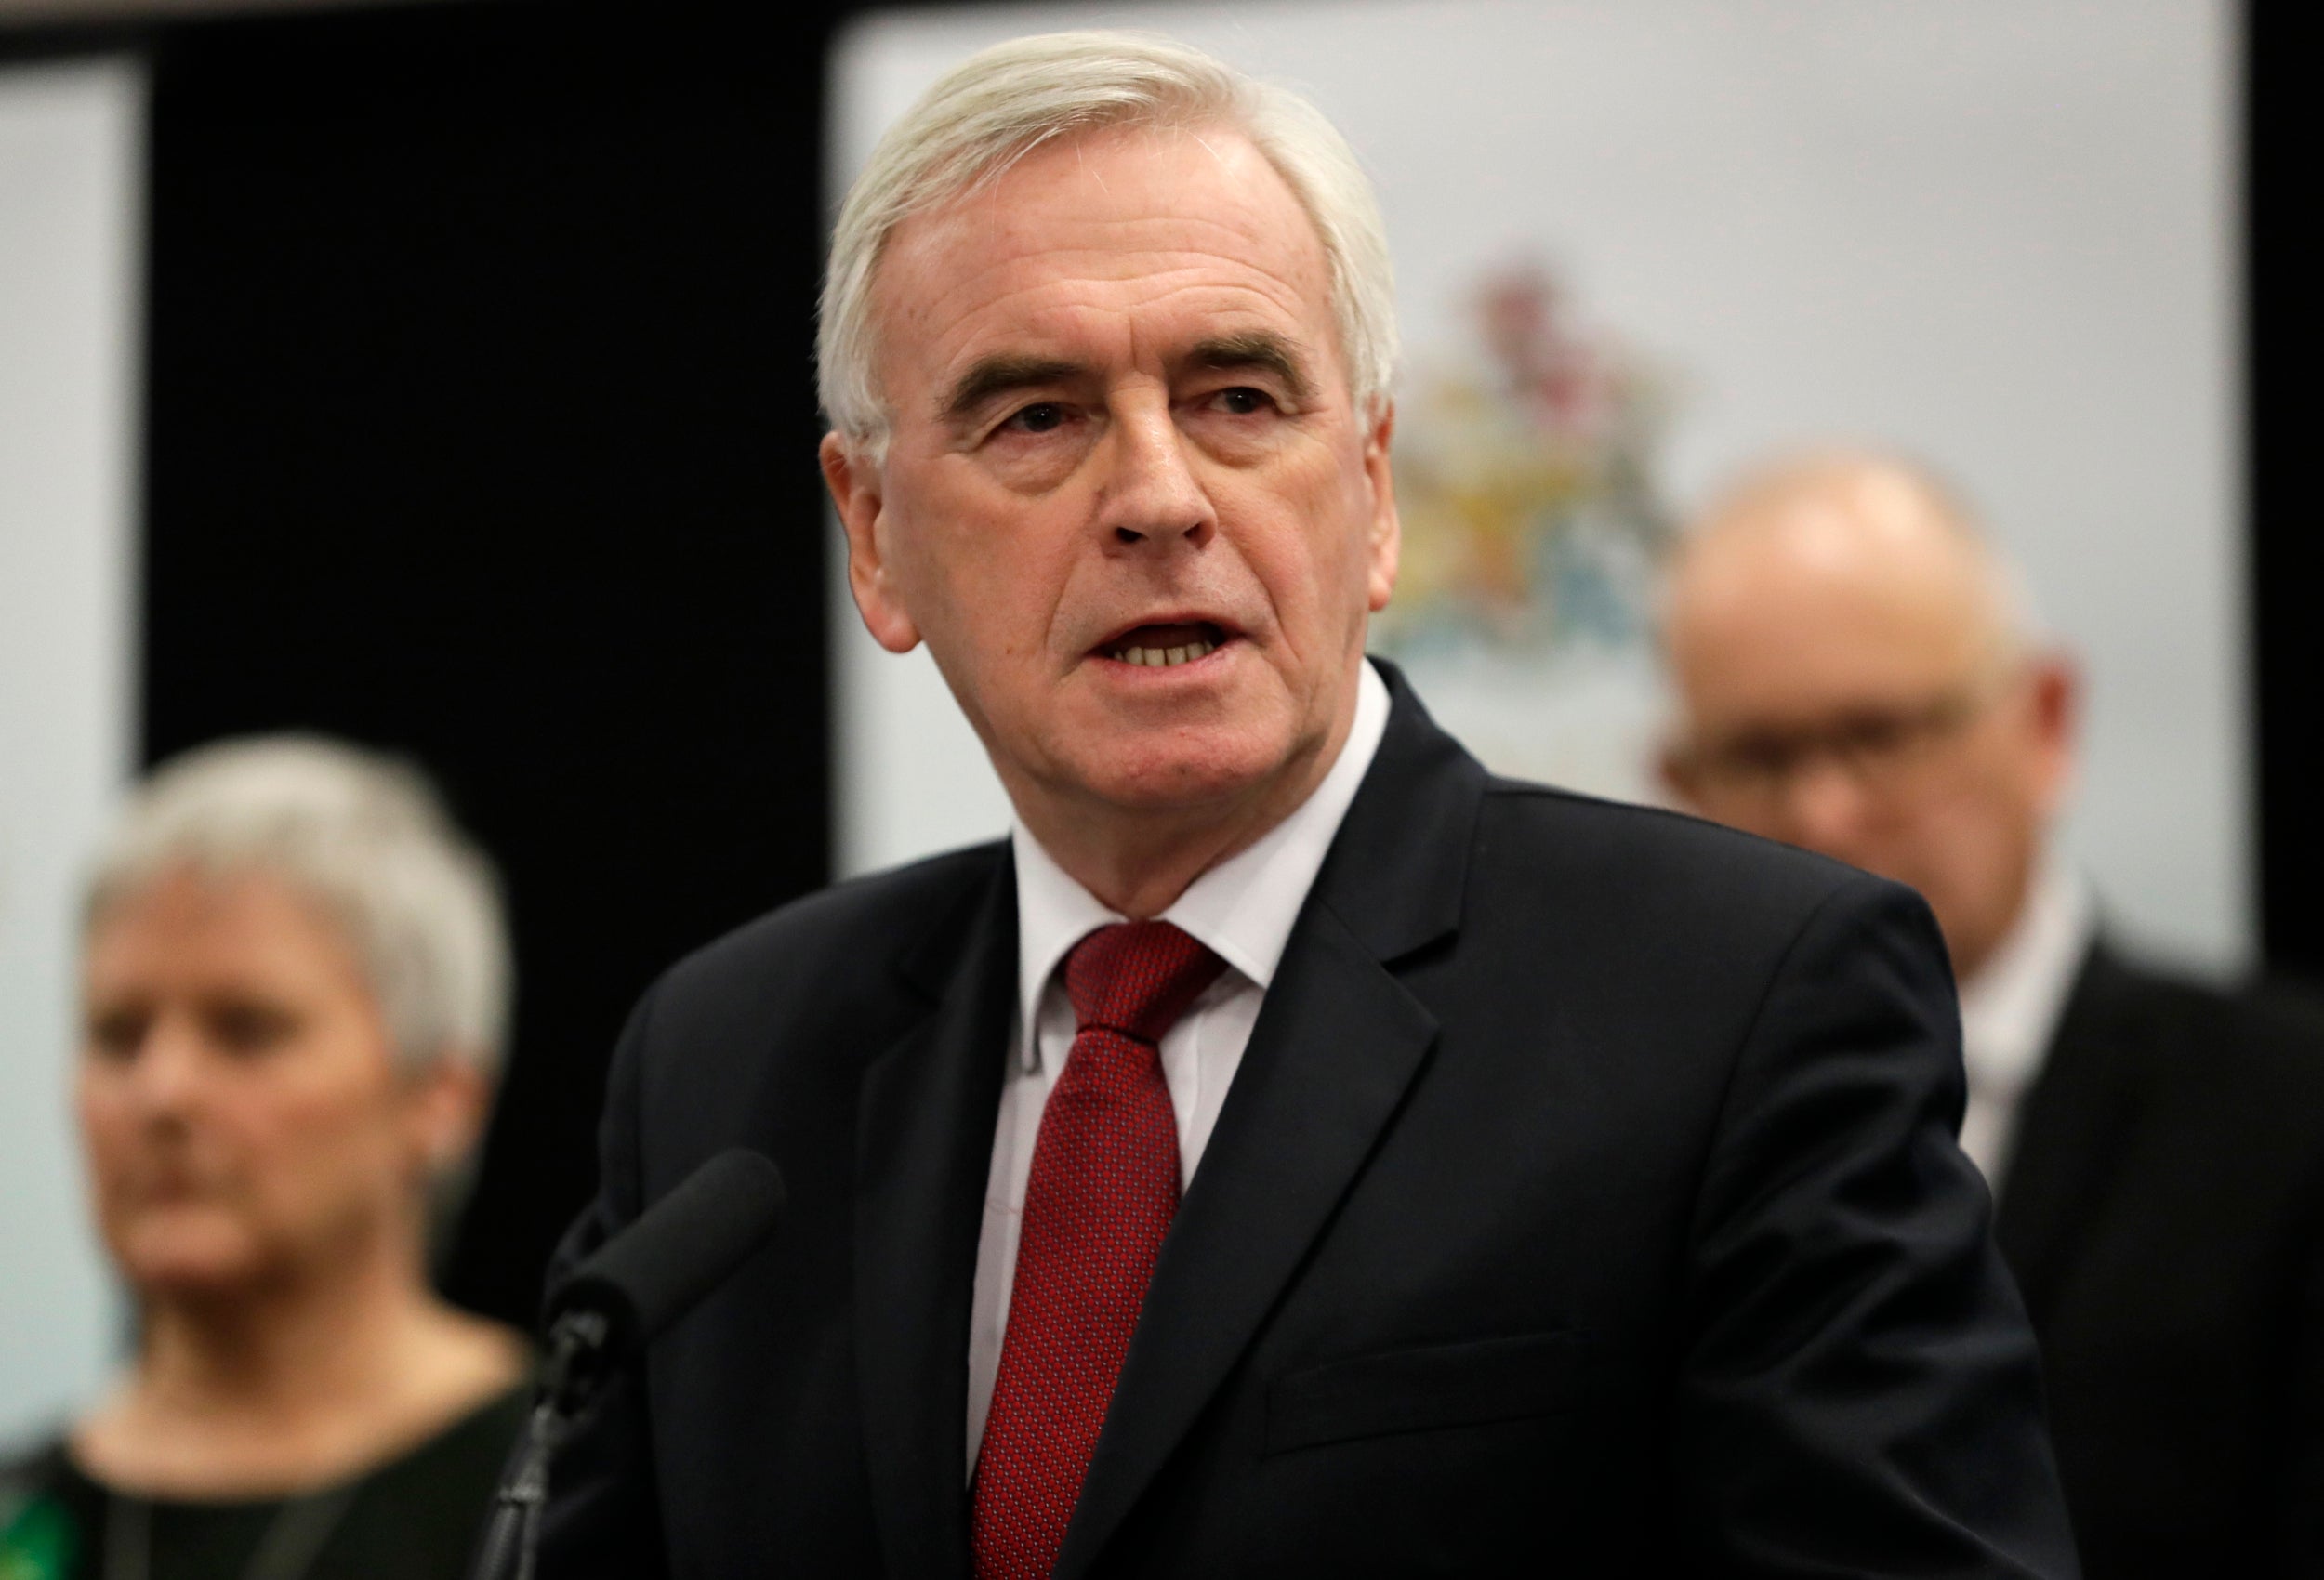 John McDonnell is sticking to the party line by insisting Labour lost the election due to Brexit